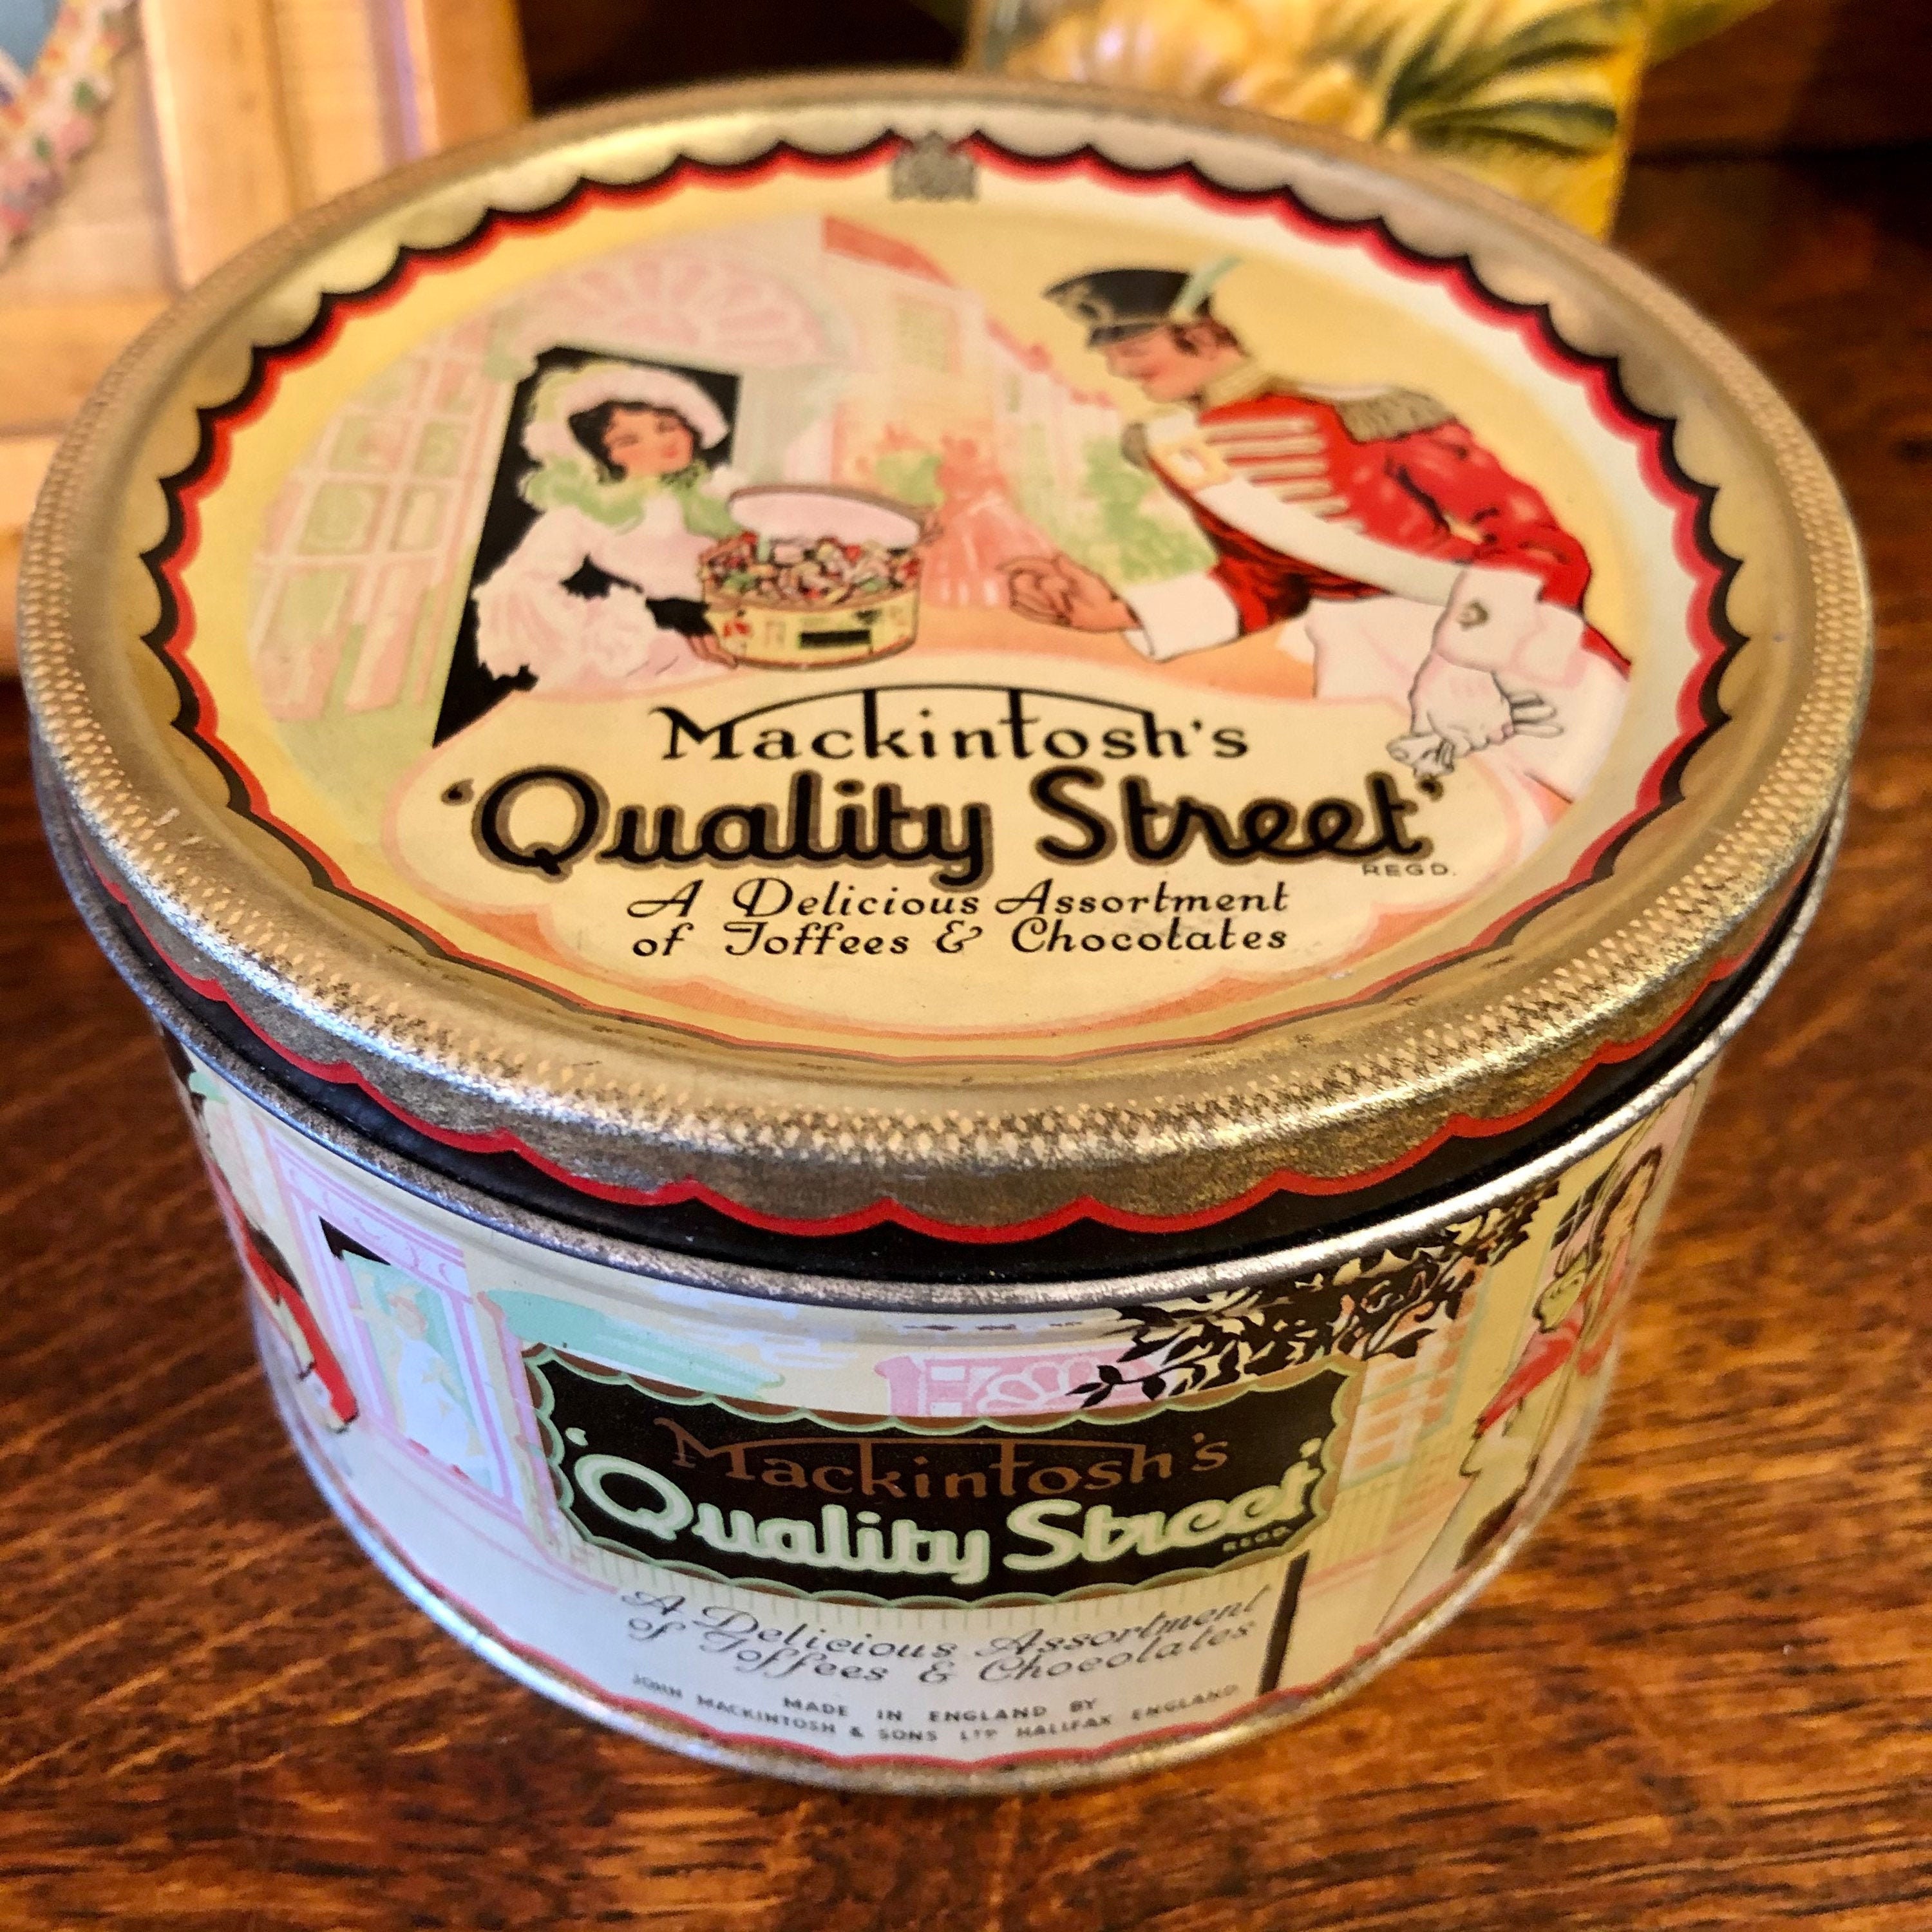 Darning Kit Vintage Quality Street Tin Filled With a Vintage Pink